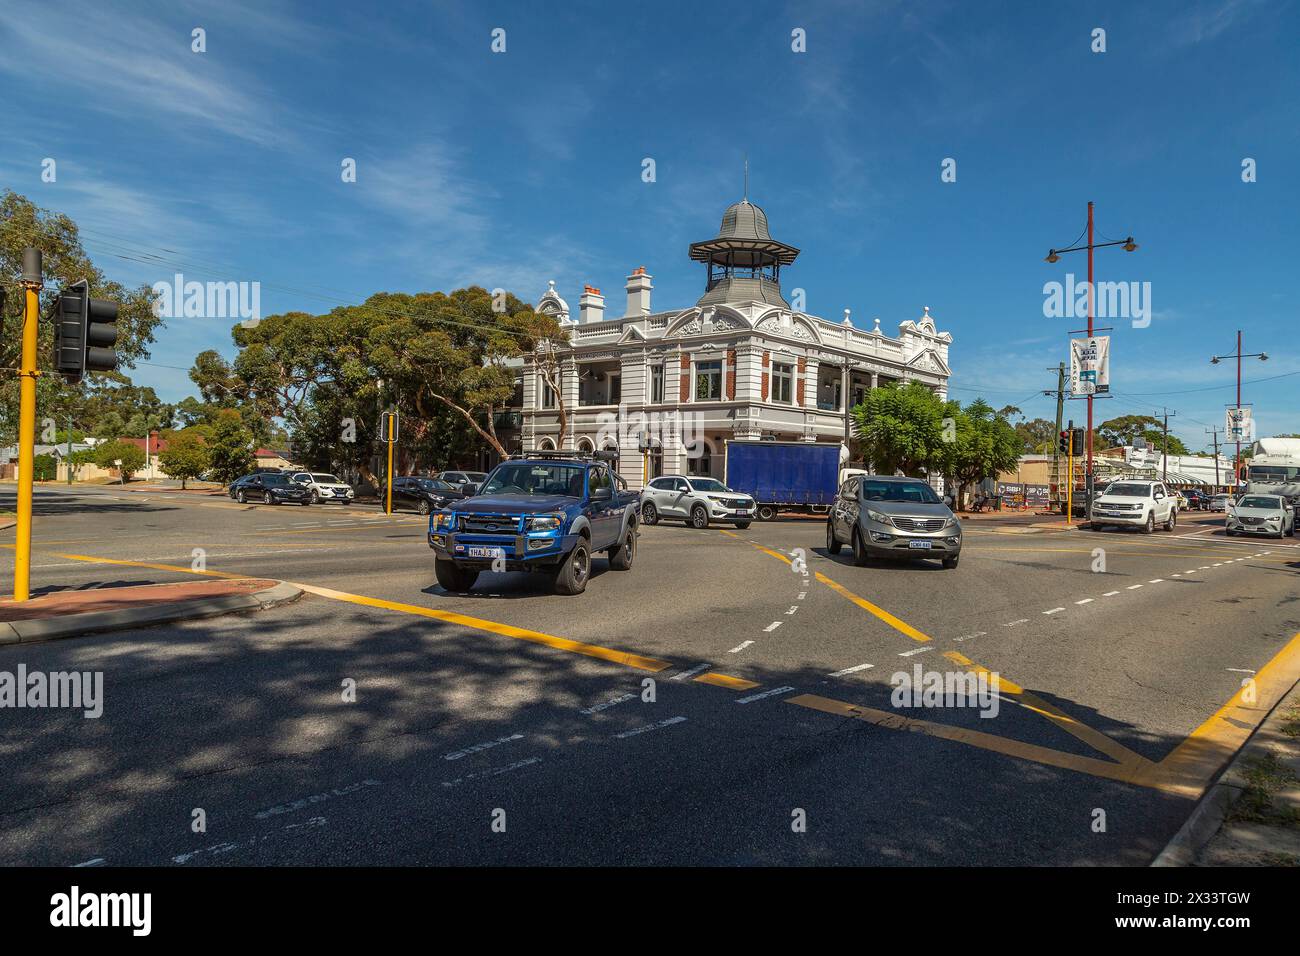 The Guildford hotel on the corner of Johnson street and James street  in Guildford, Western Australia. Stock Photo